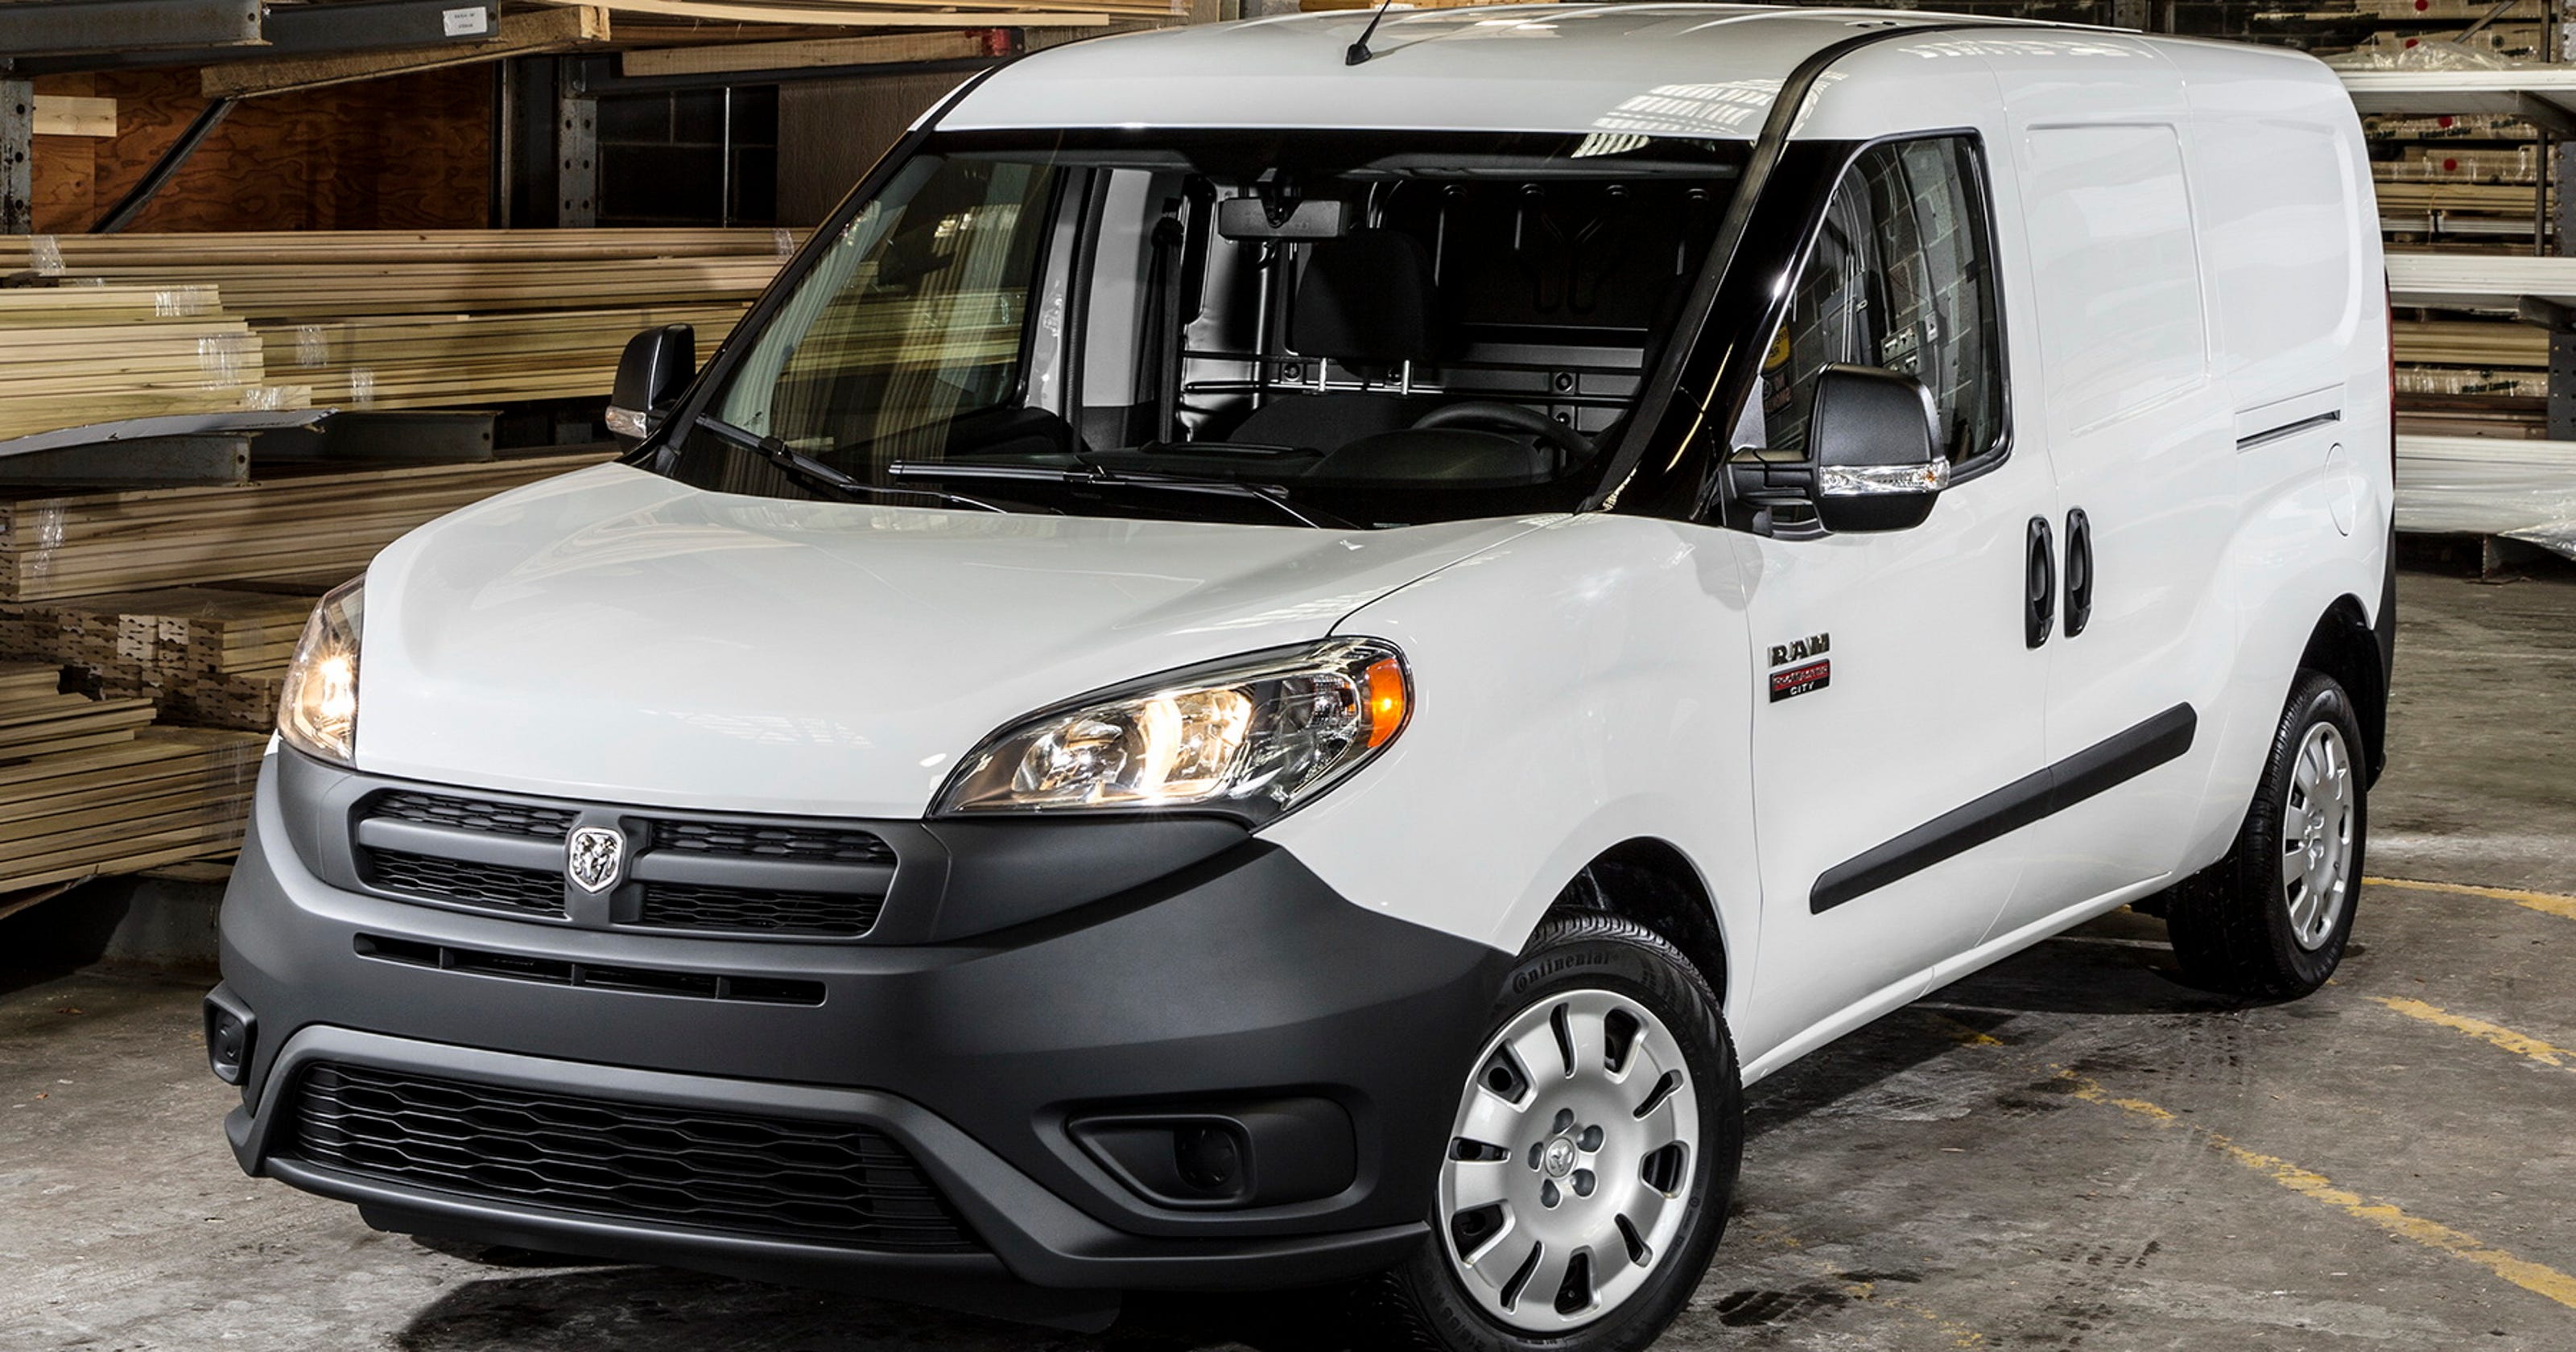 2015-ram-promaster-city-a-new-commercial-option